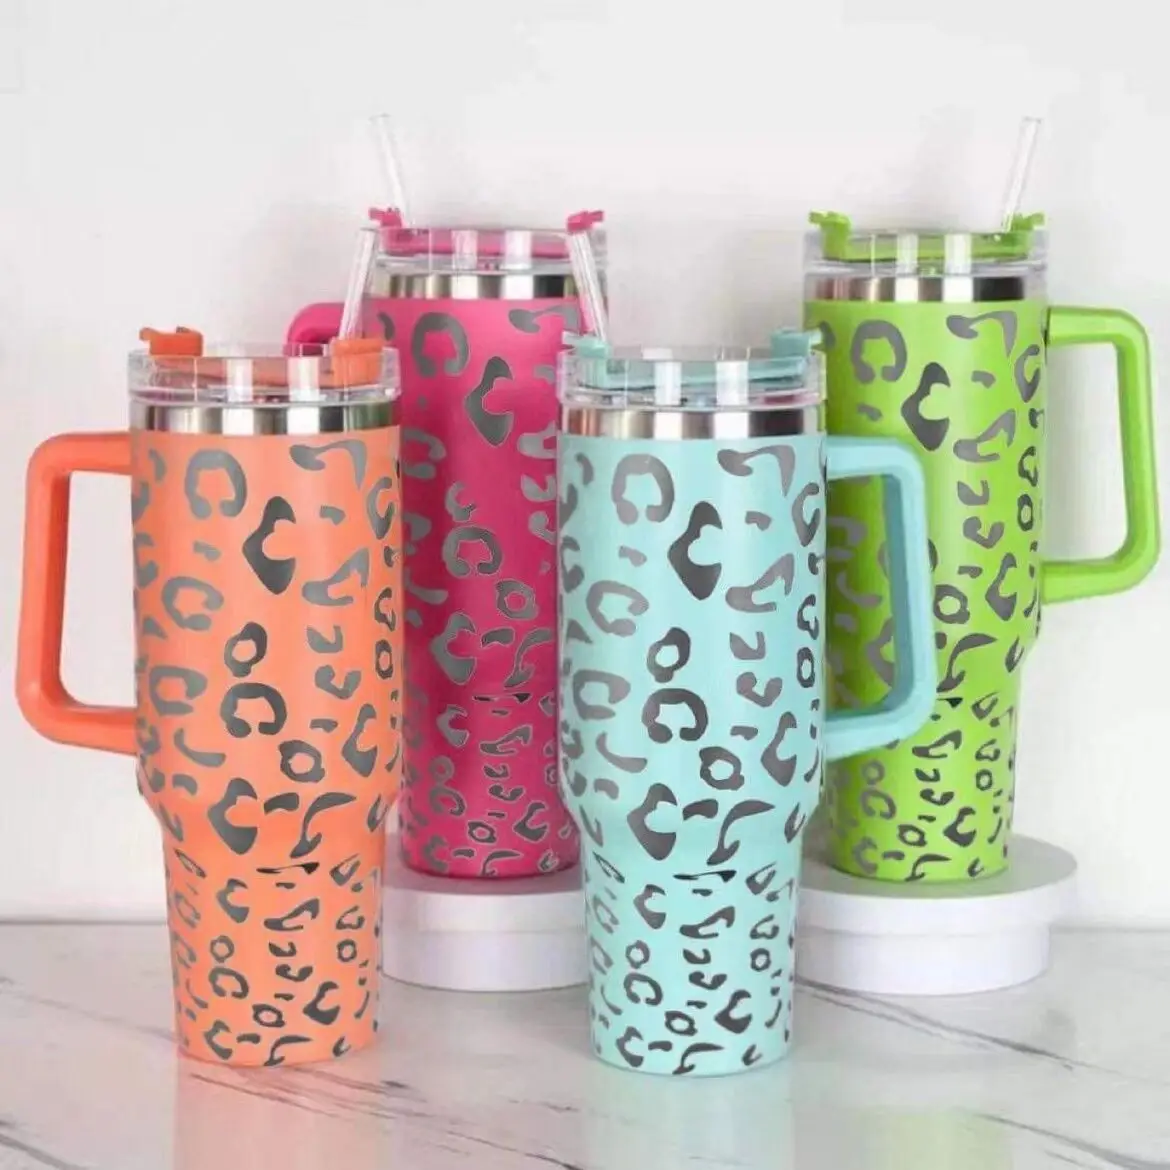 https://ae01.alicdn.com/kf/S7348e398897445e4adfefc452b8559aaD/75pcs-Leopard-stainless-steel-tumbler-with-lid-straw-cheetah-handdle-tumbler-Laser-Engraved-mug-cup-beer.jpg